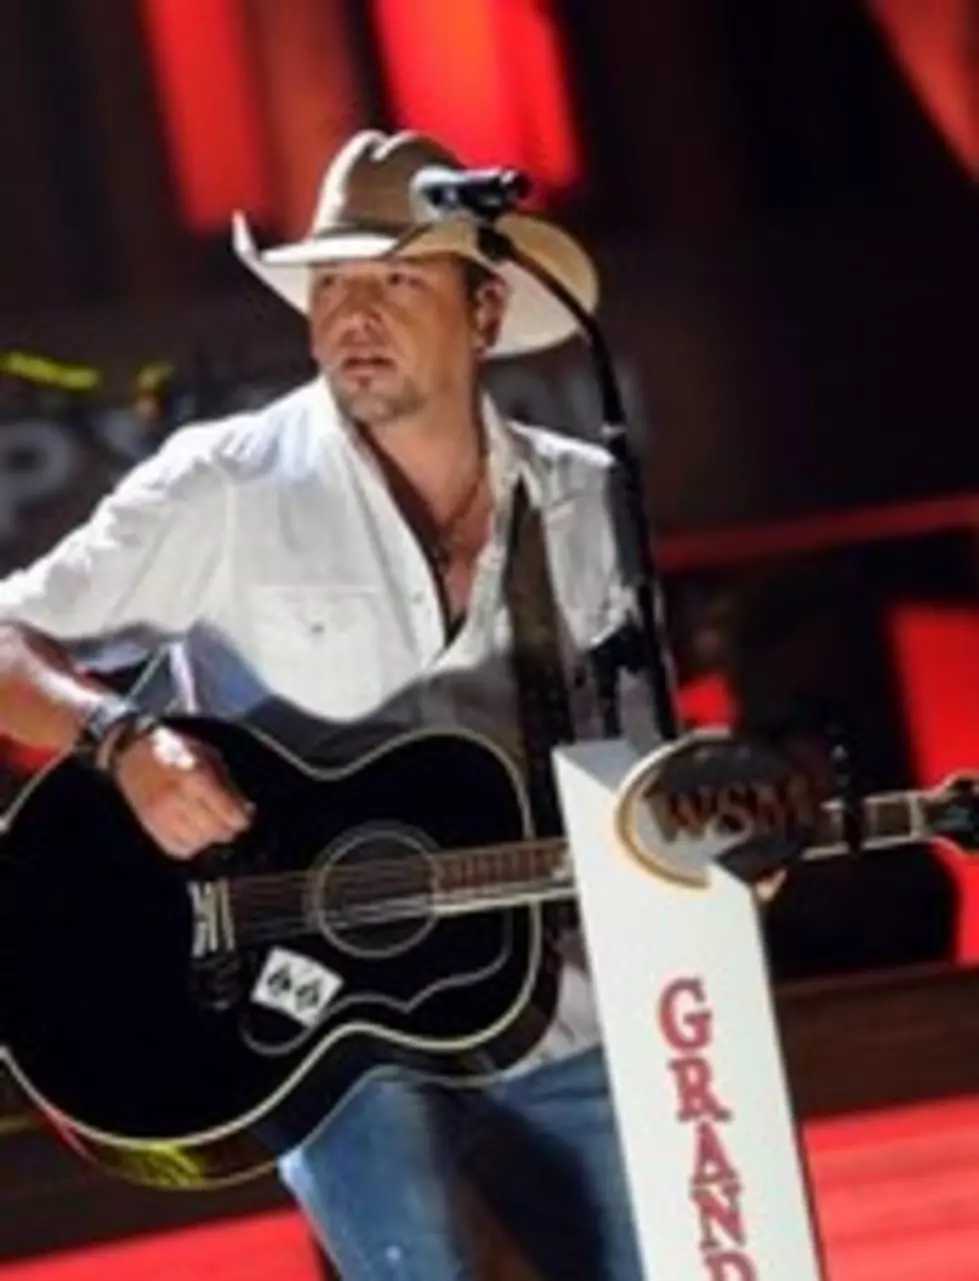 Jason Aldean Ranks #4 Among Music’s Top Artists in 2011